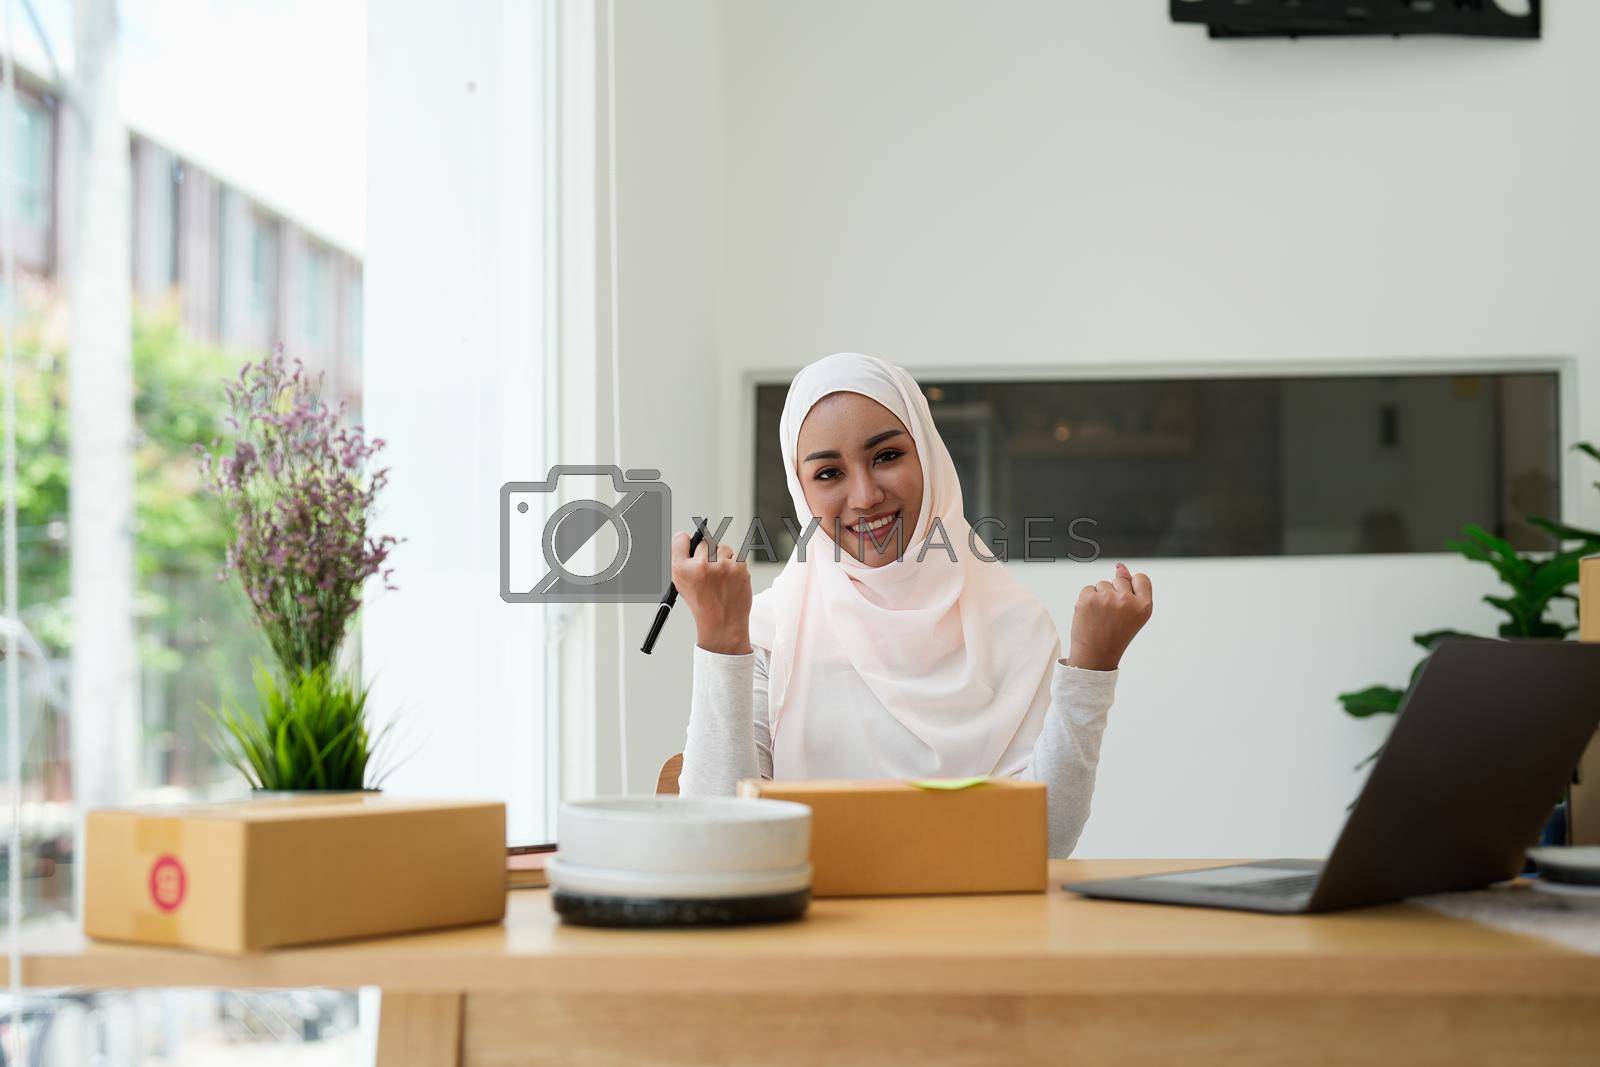 Royalty free image of excited asian muslim woman small business owner look at camera by nateemee